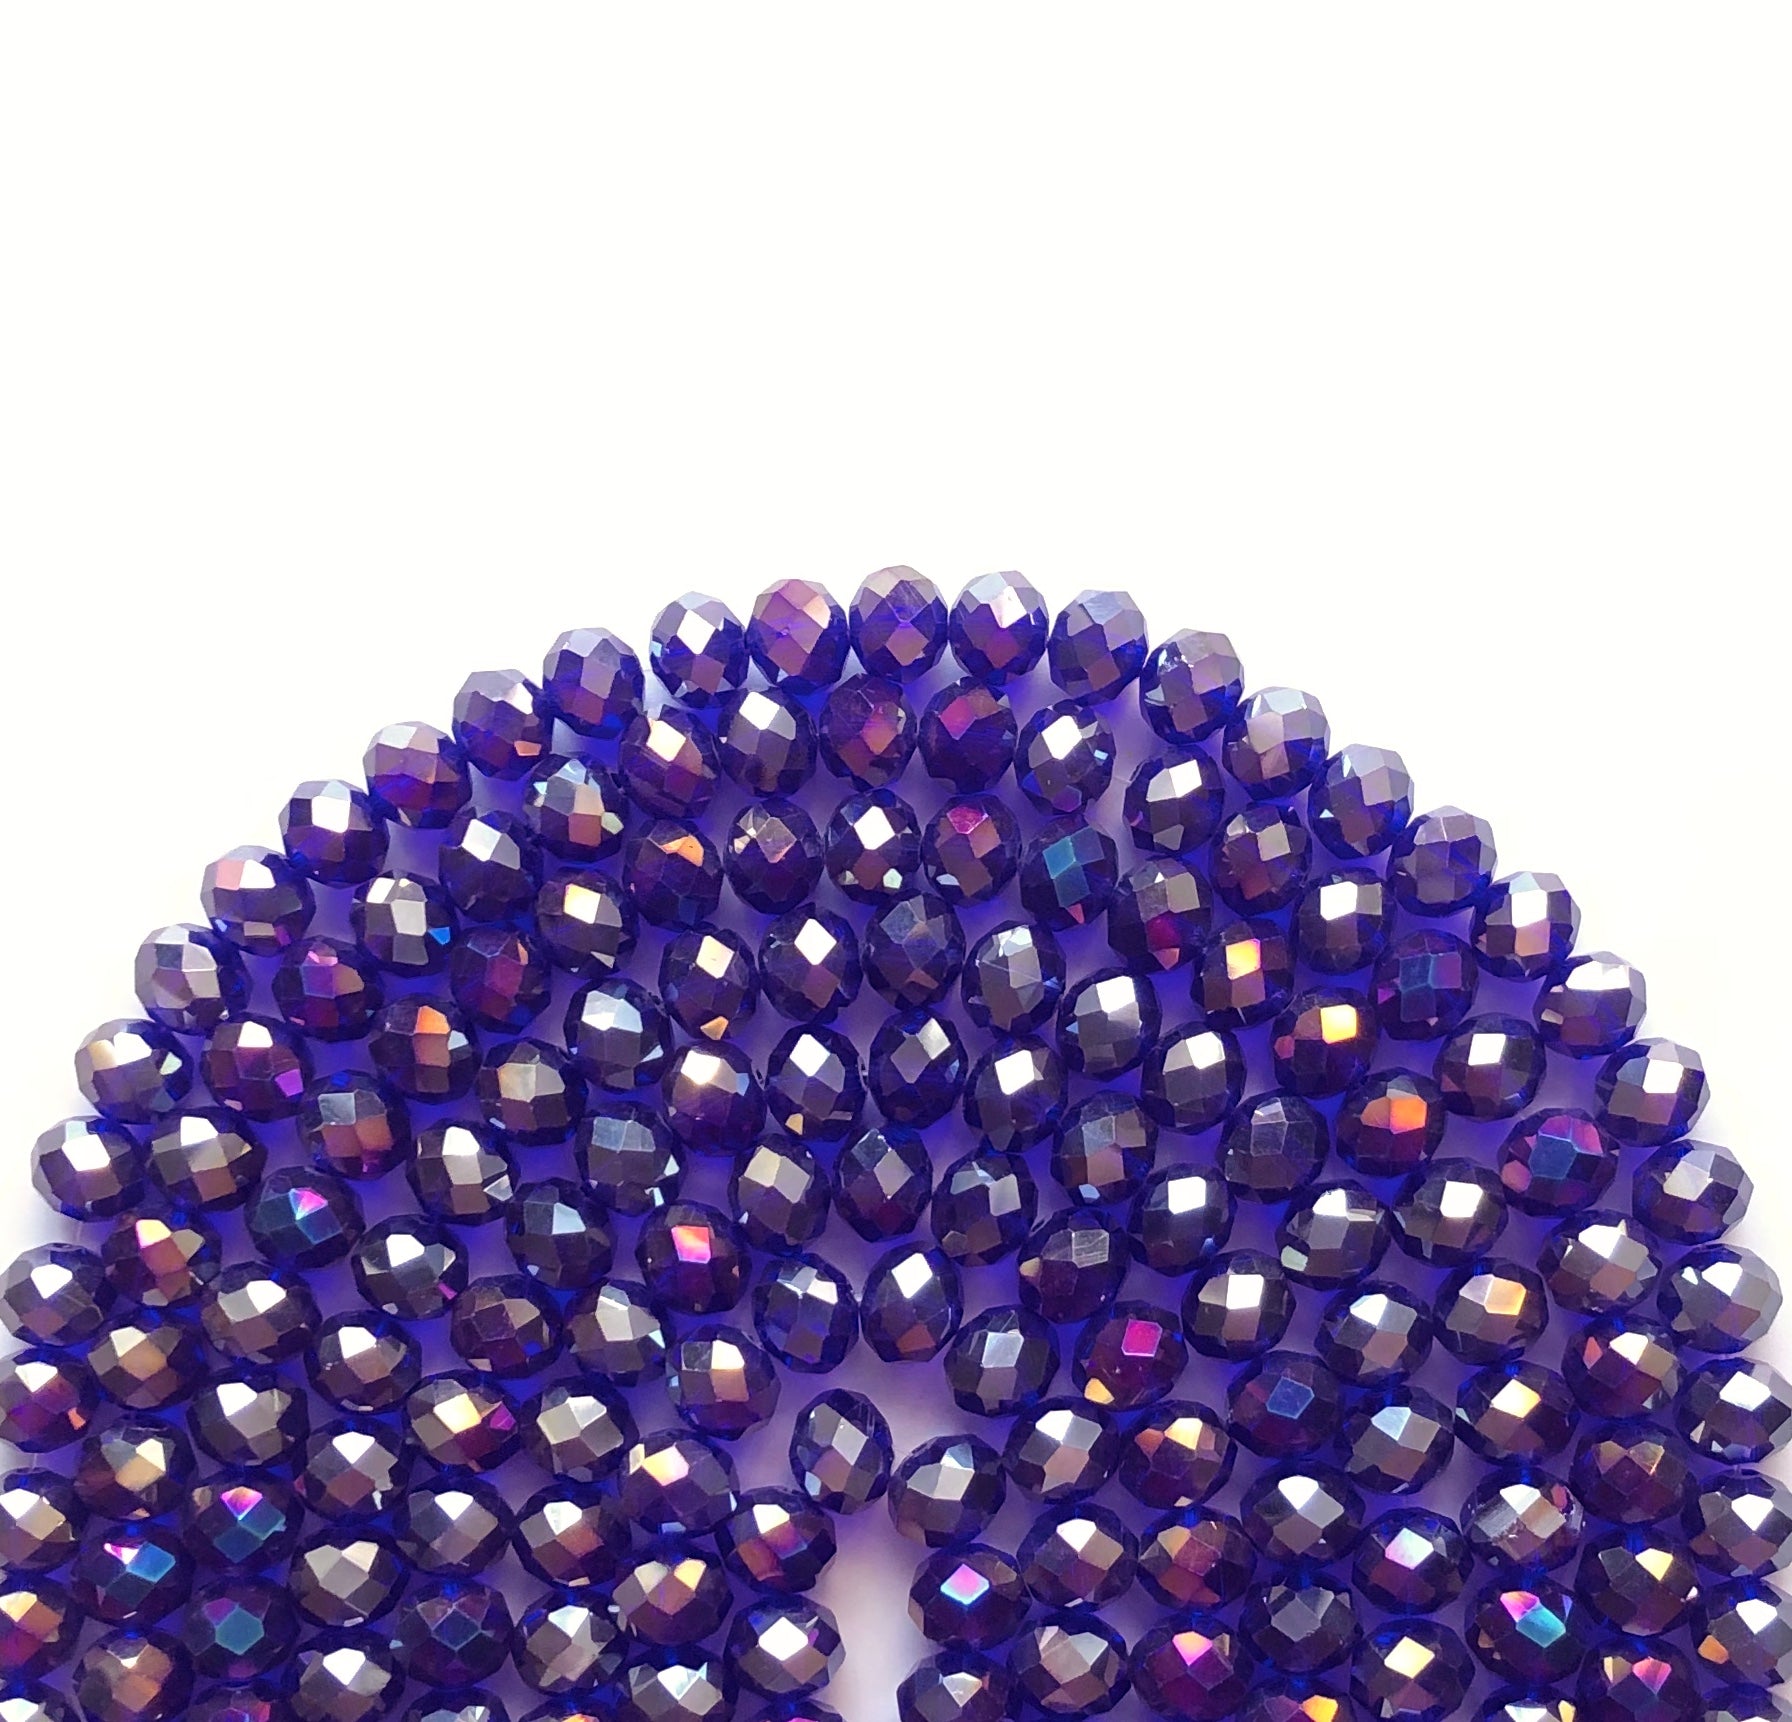 2 Strands/lot 10mm Purple AB Faceted Glass Beads Purple AB Glass Beads Faceted Glass Beads Charms Beads Beyond